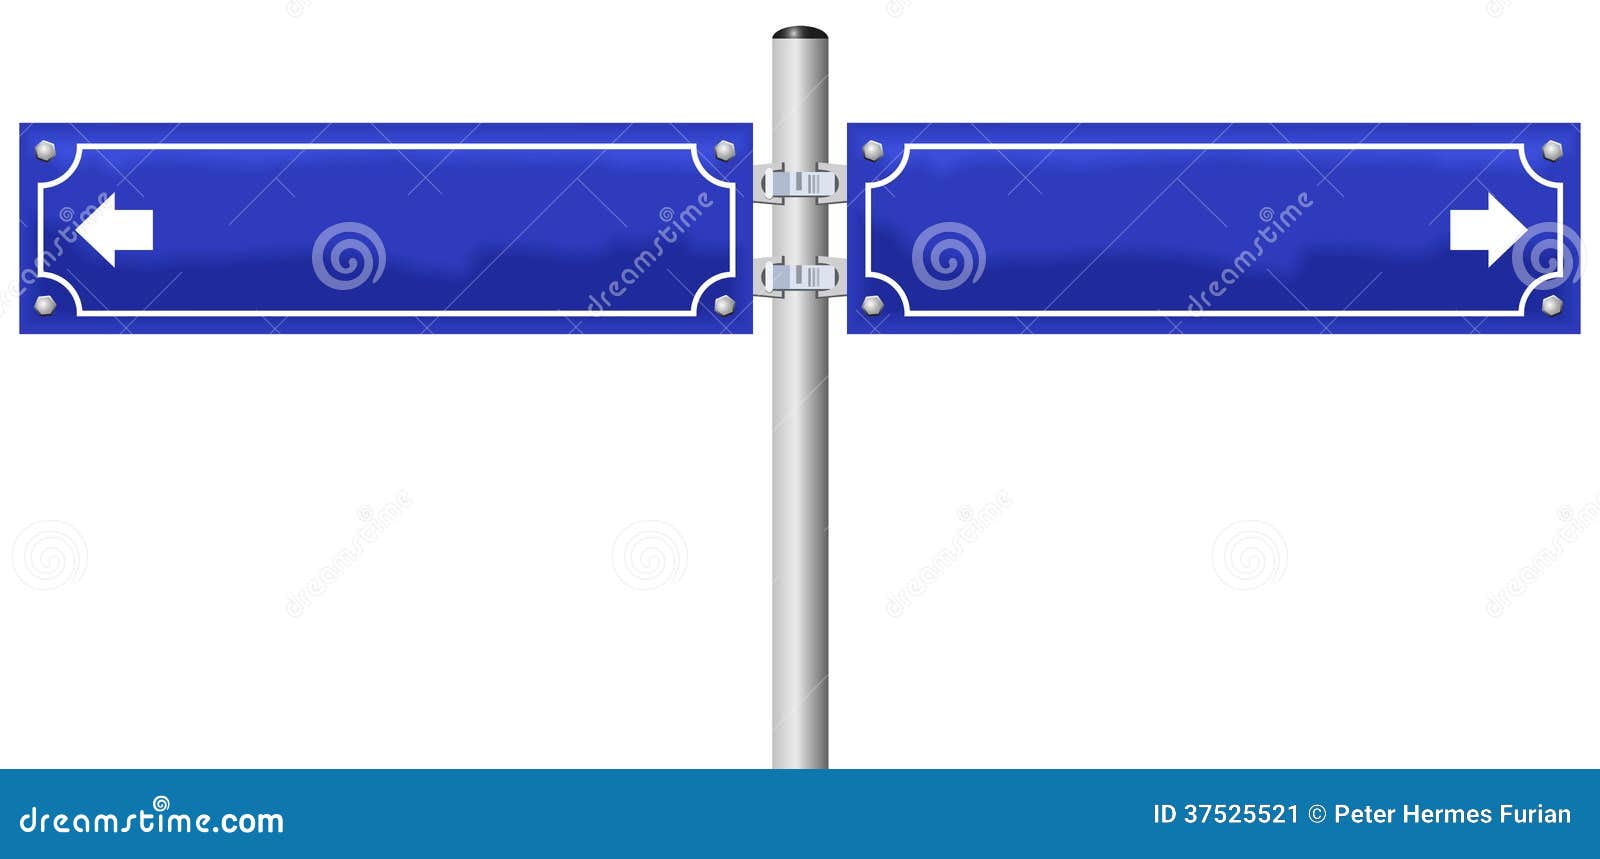 Blank Street Name Sign stock vector. Illustration of astray - 37525521